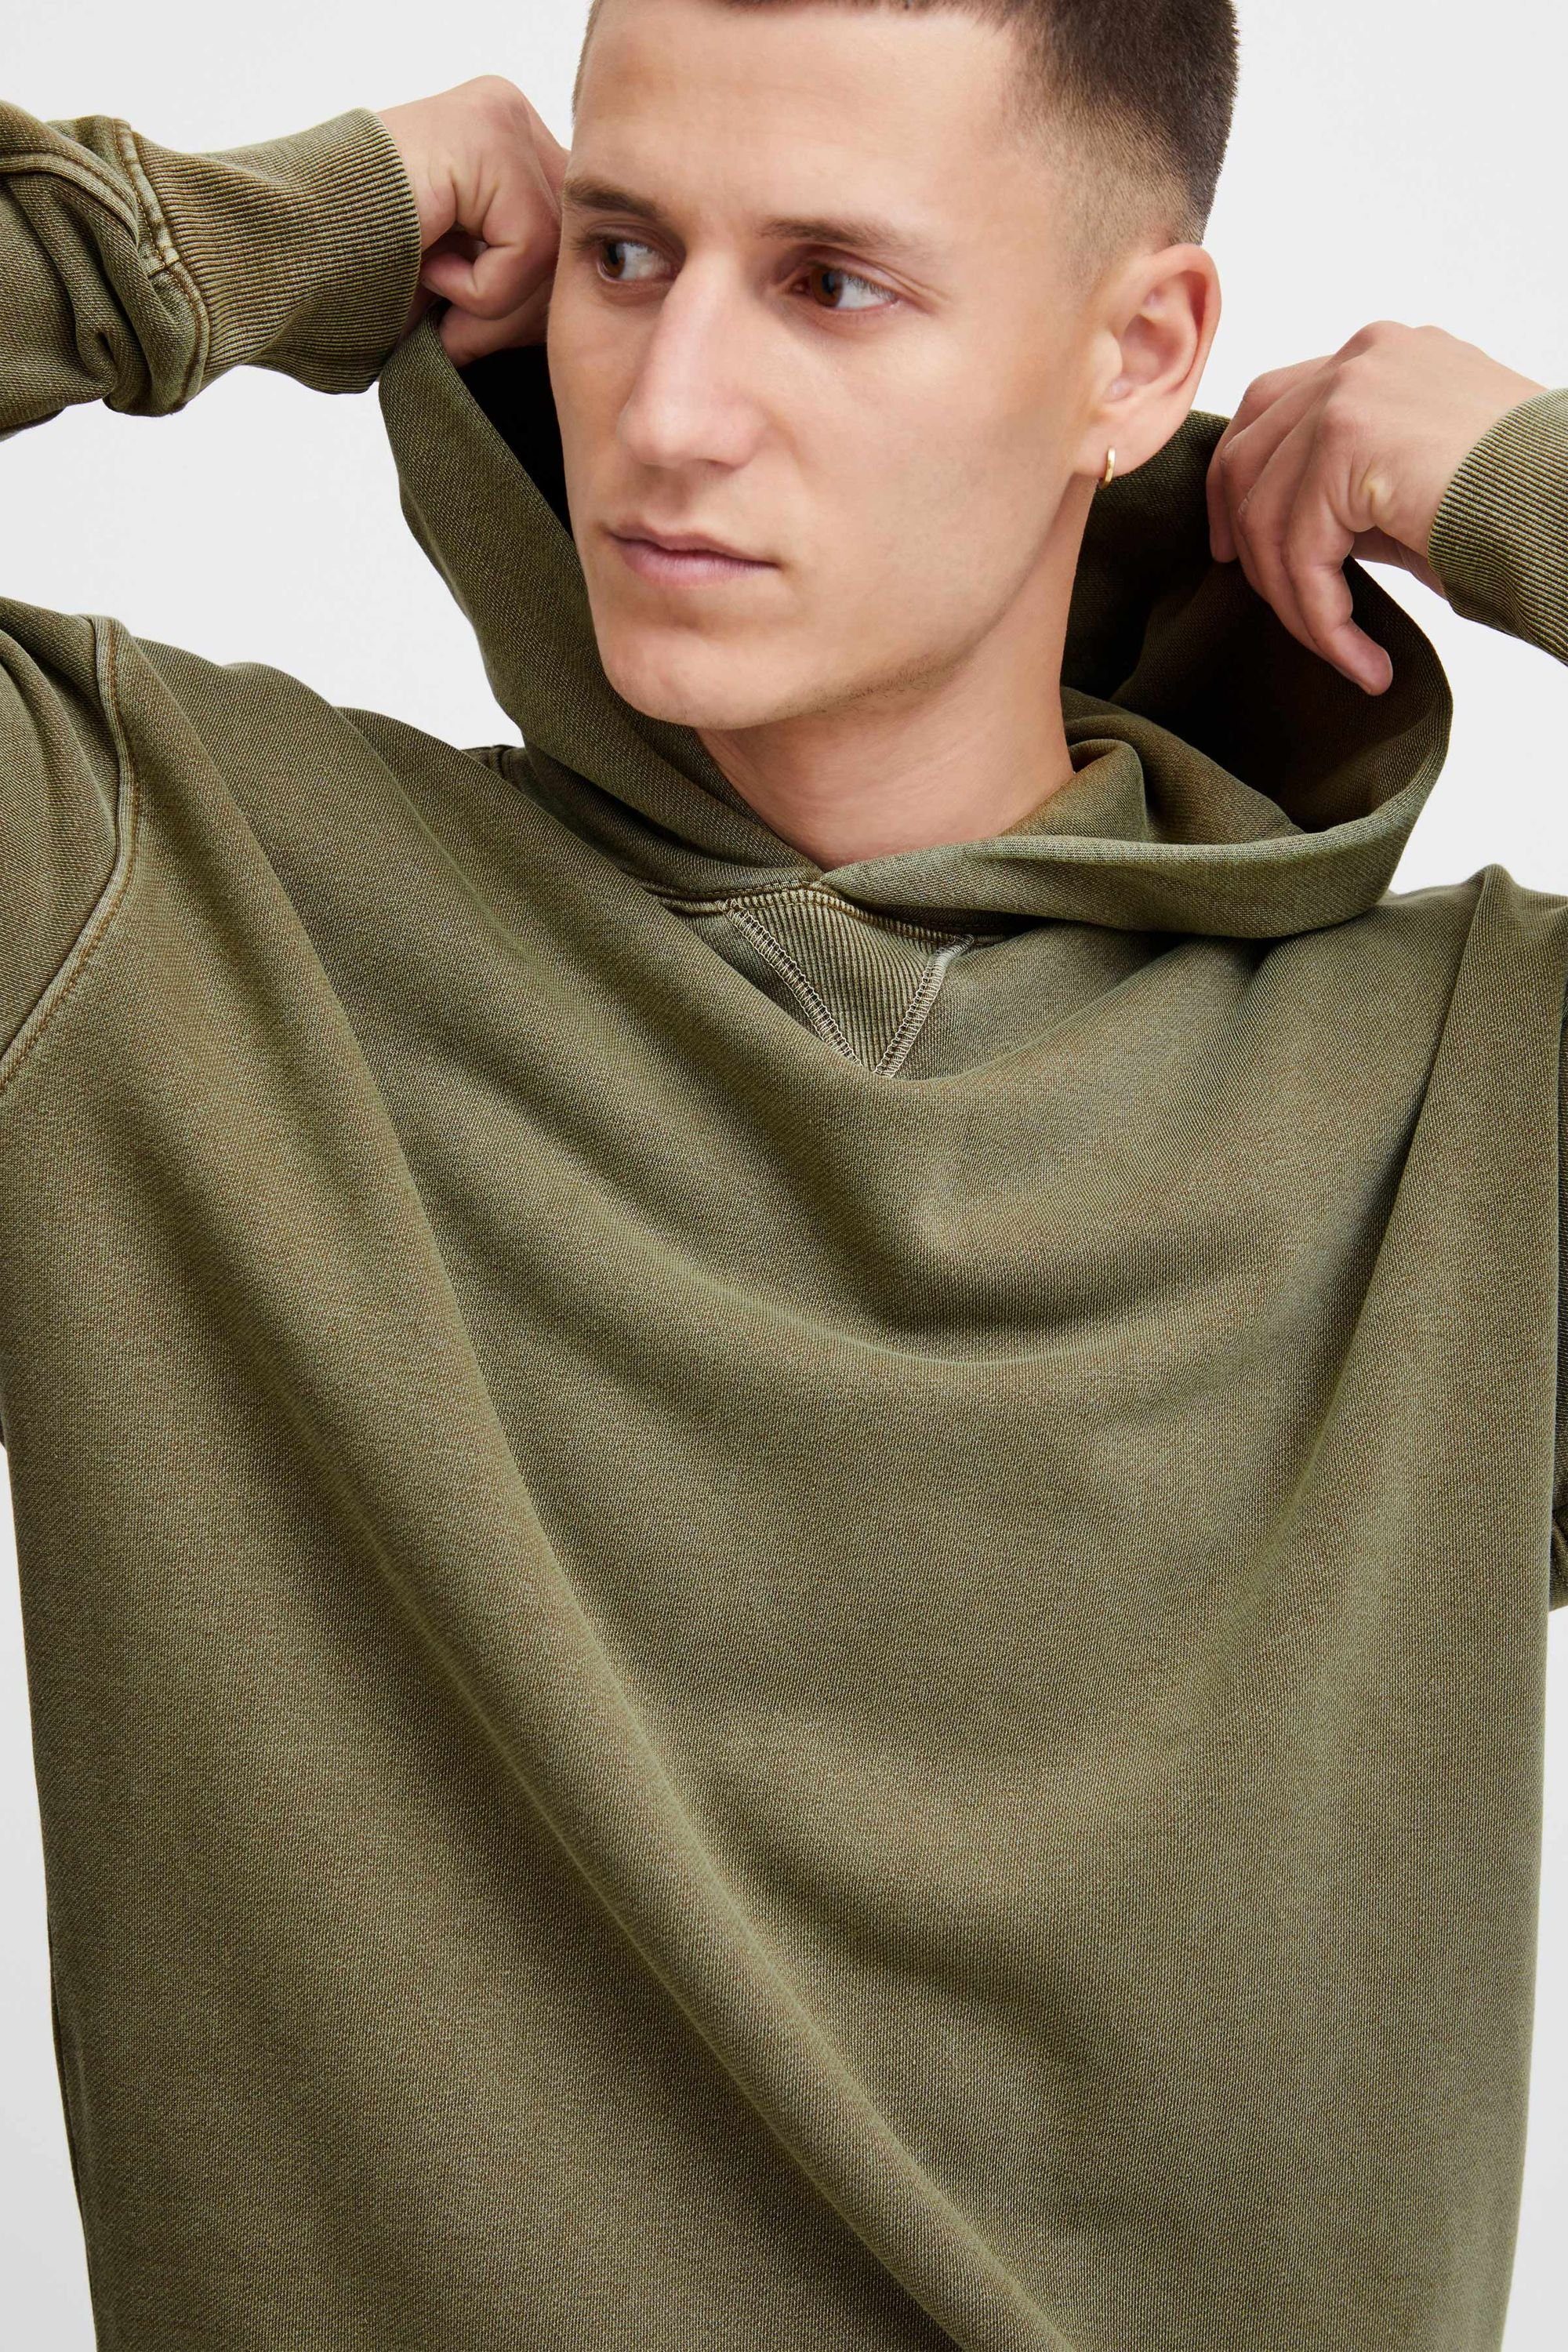 Solid Hoodie SDMattes Dusty (180515) Olive